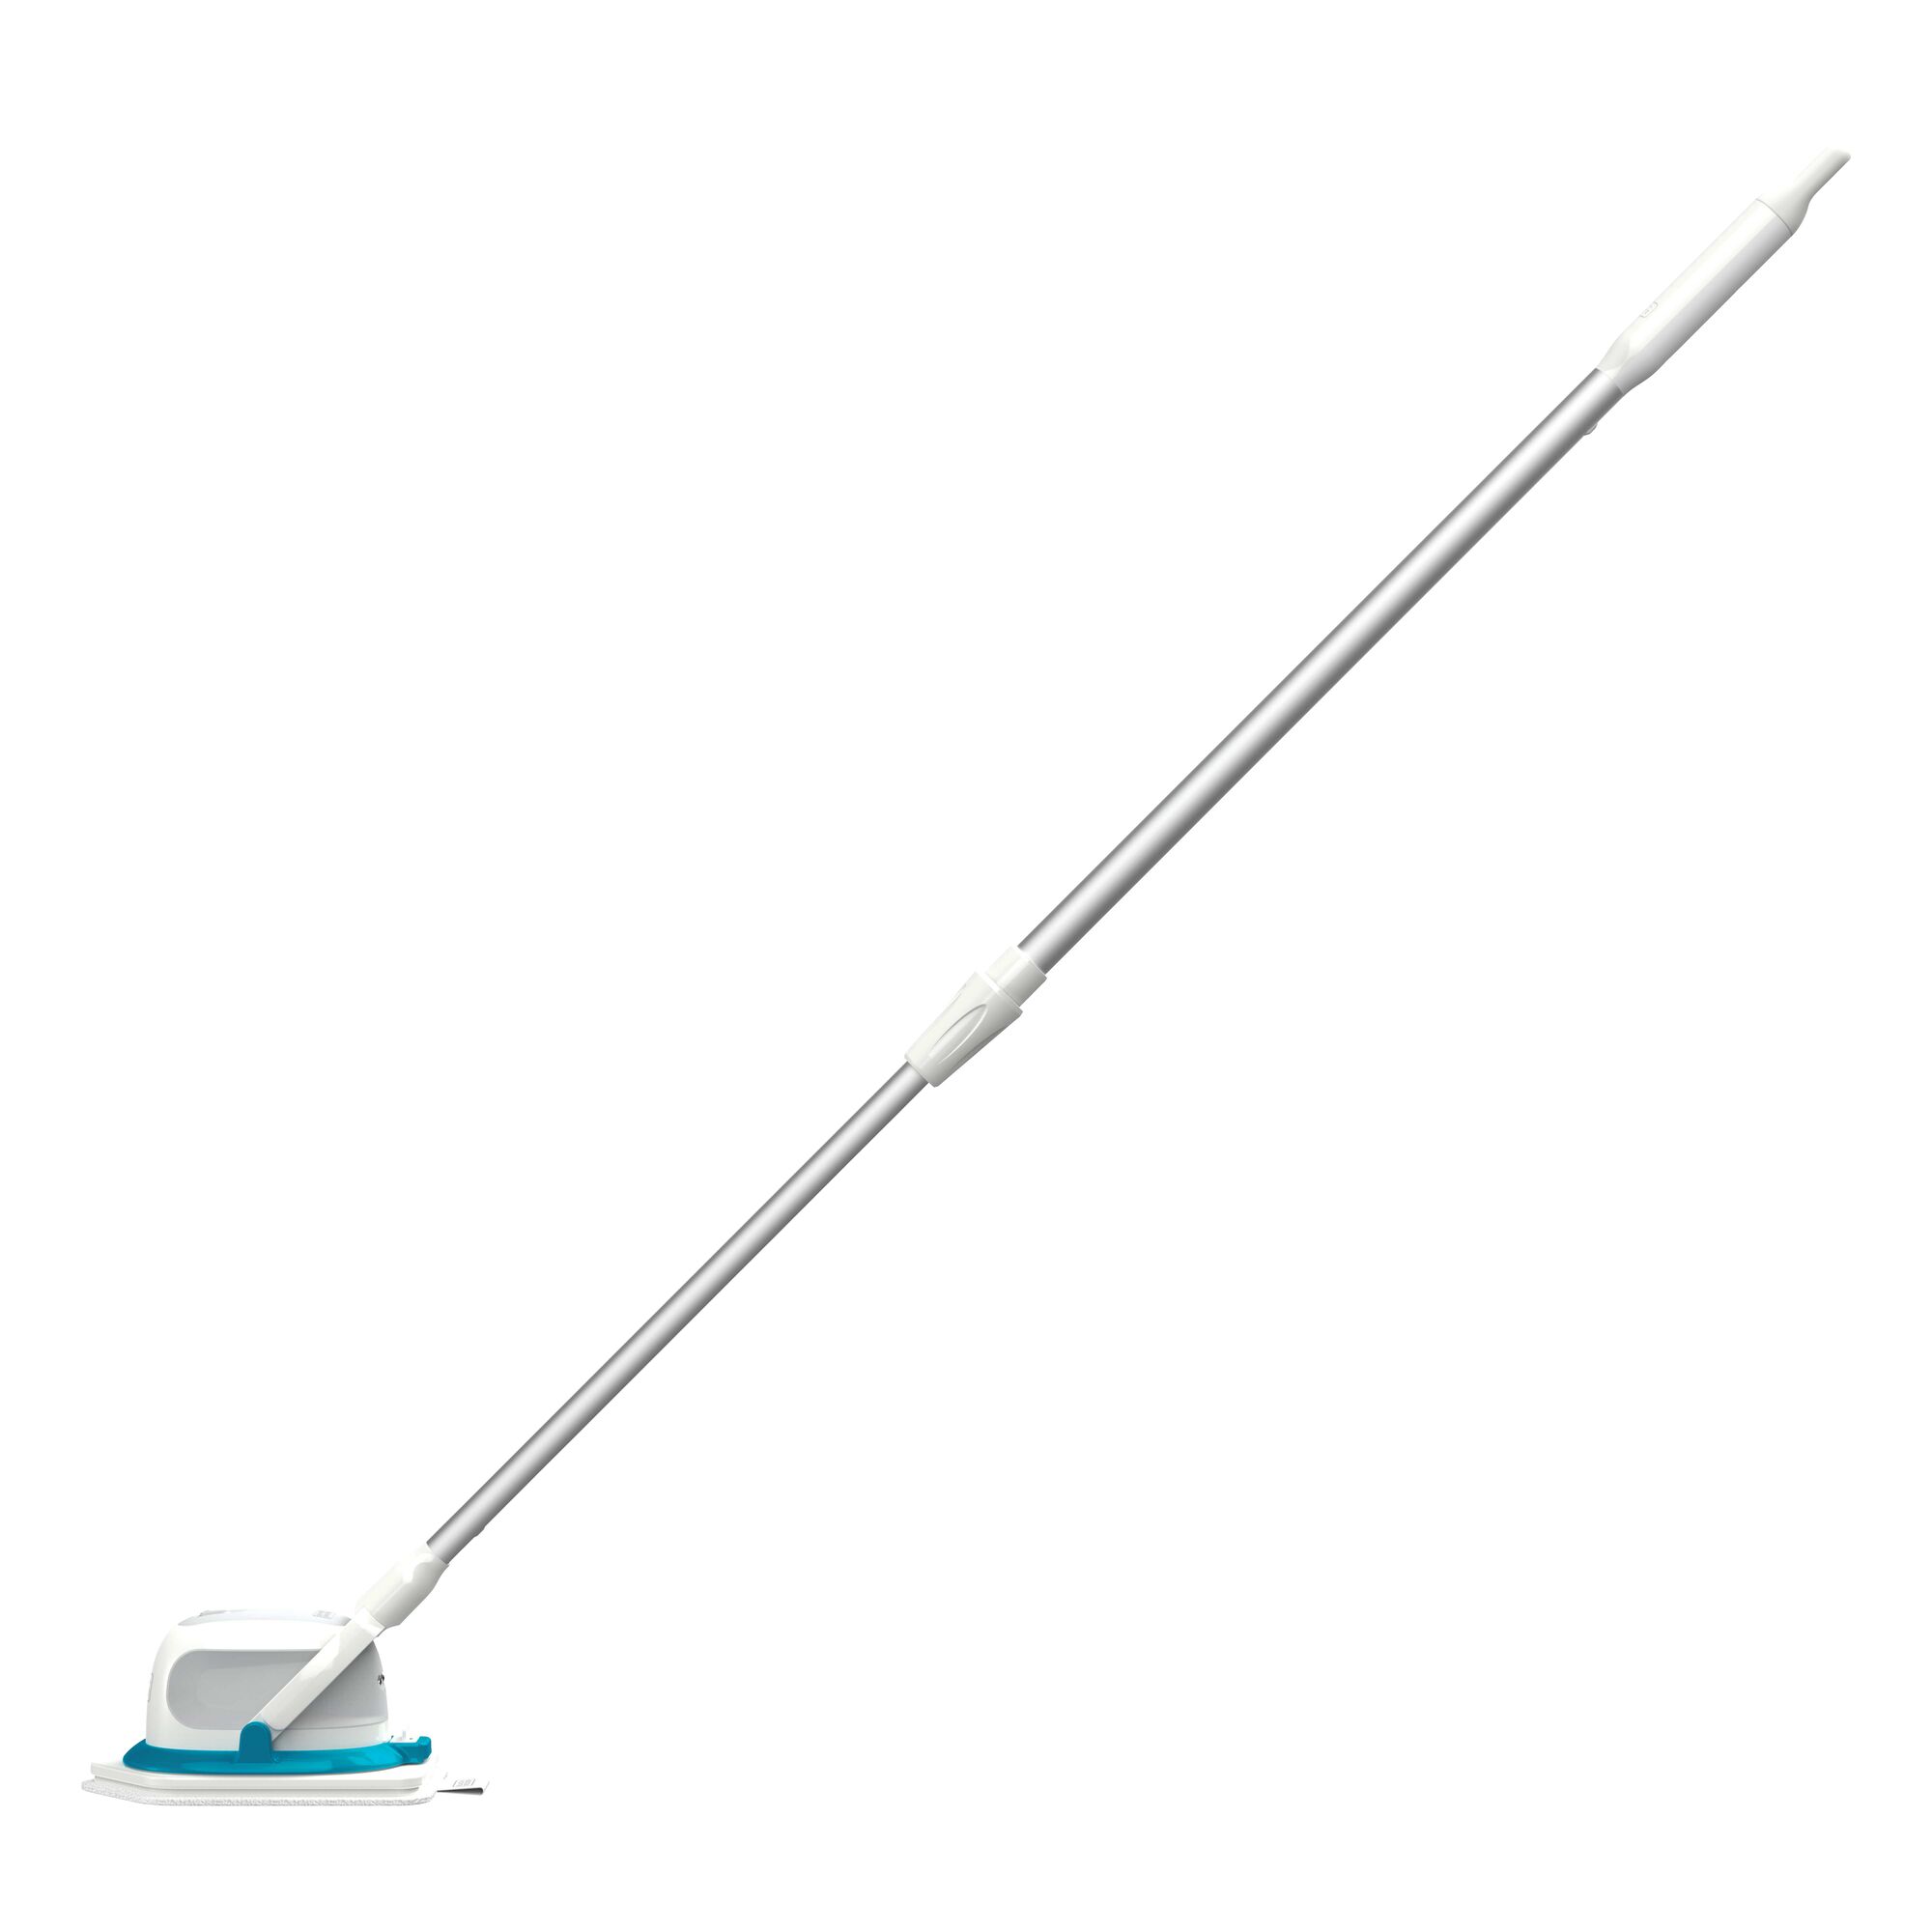 Profile of scumbuster pro rechargeable powered scrubber with extension pole.